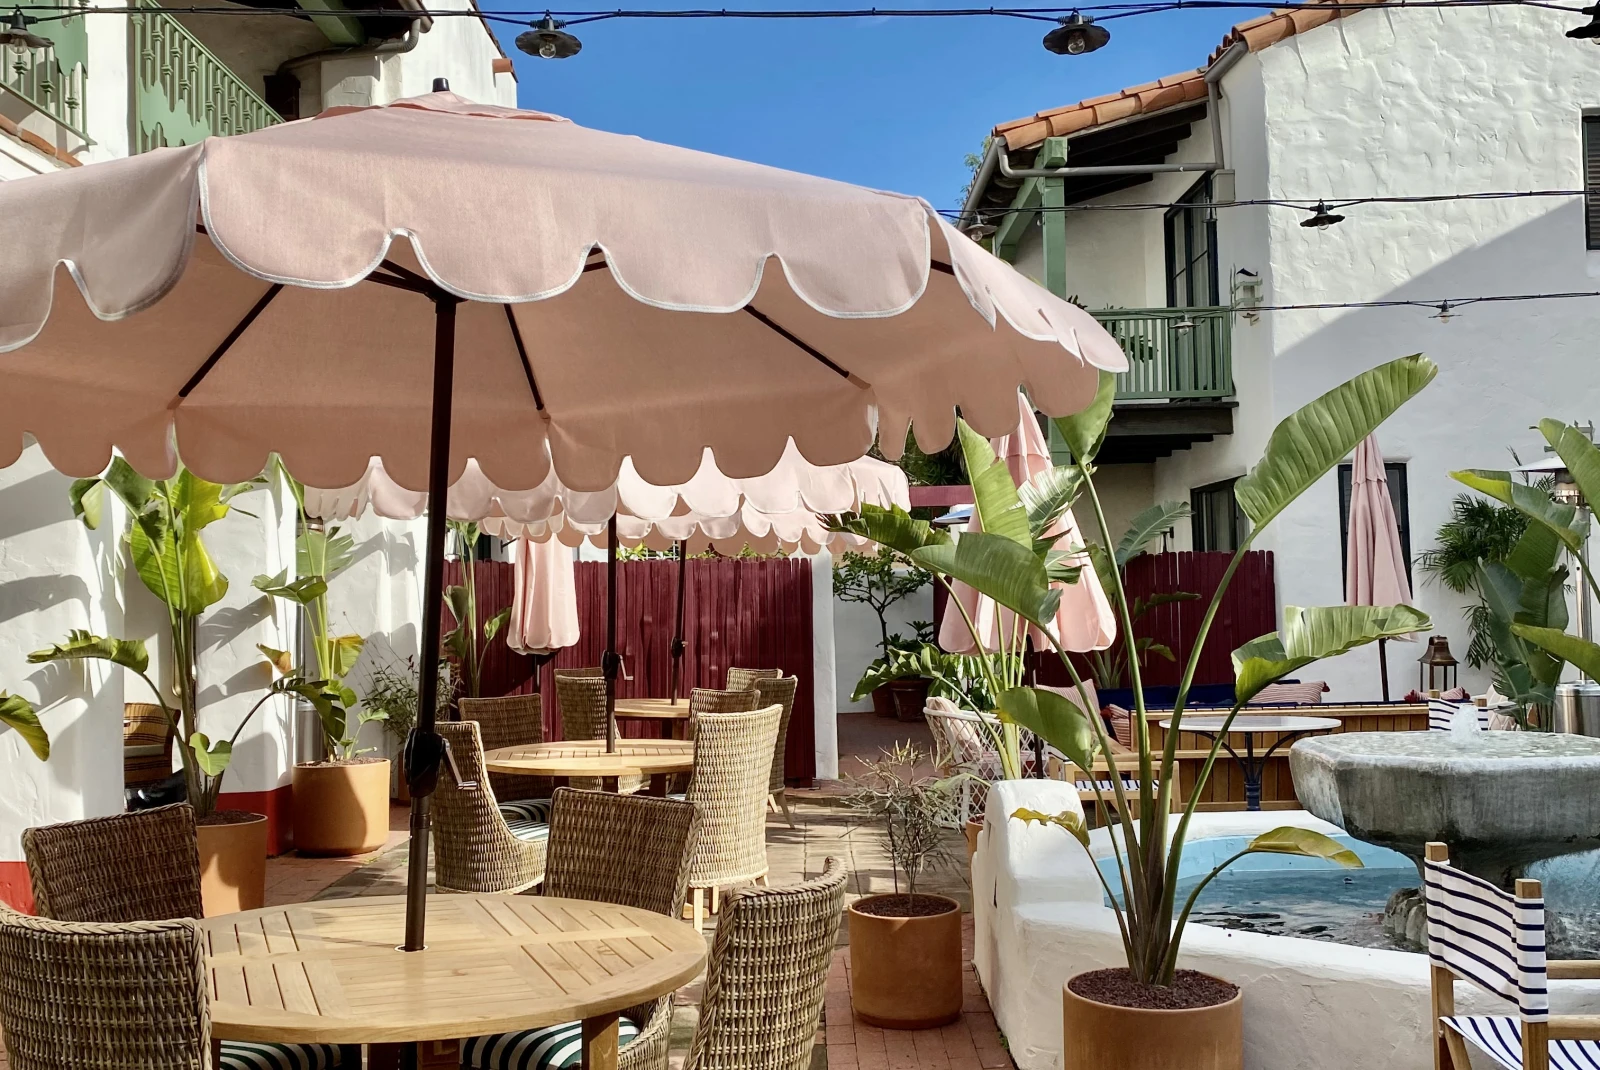 tables with pink umbrellas next to a pool during daytime